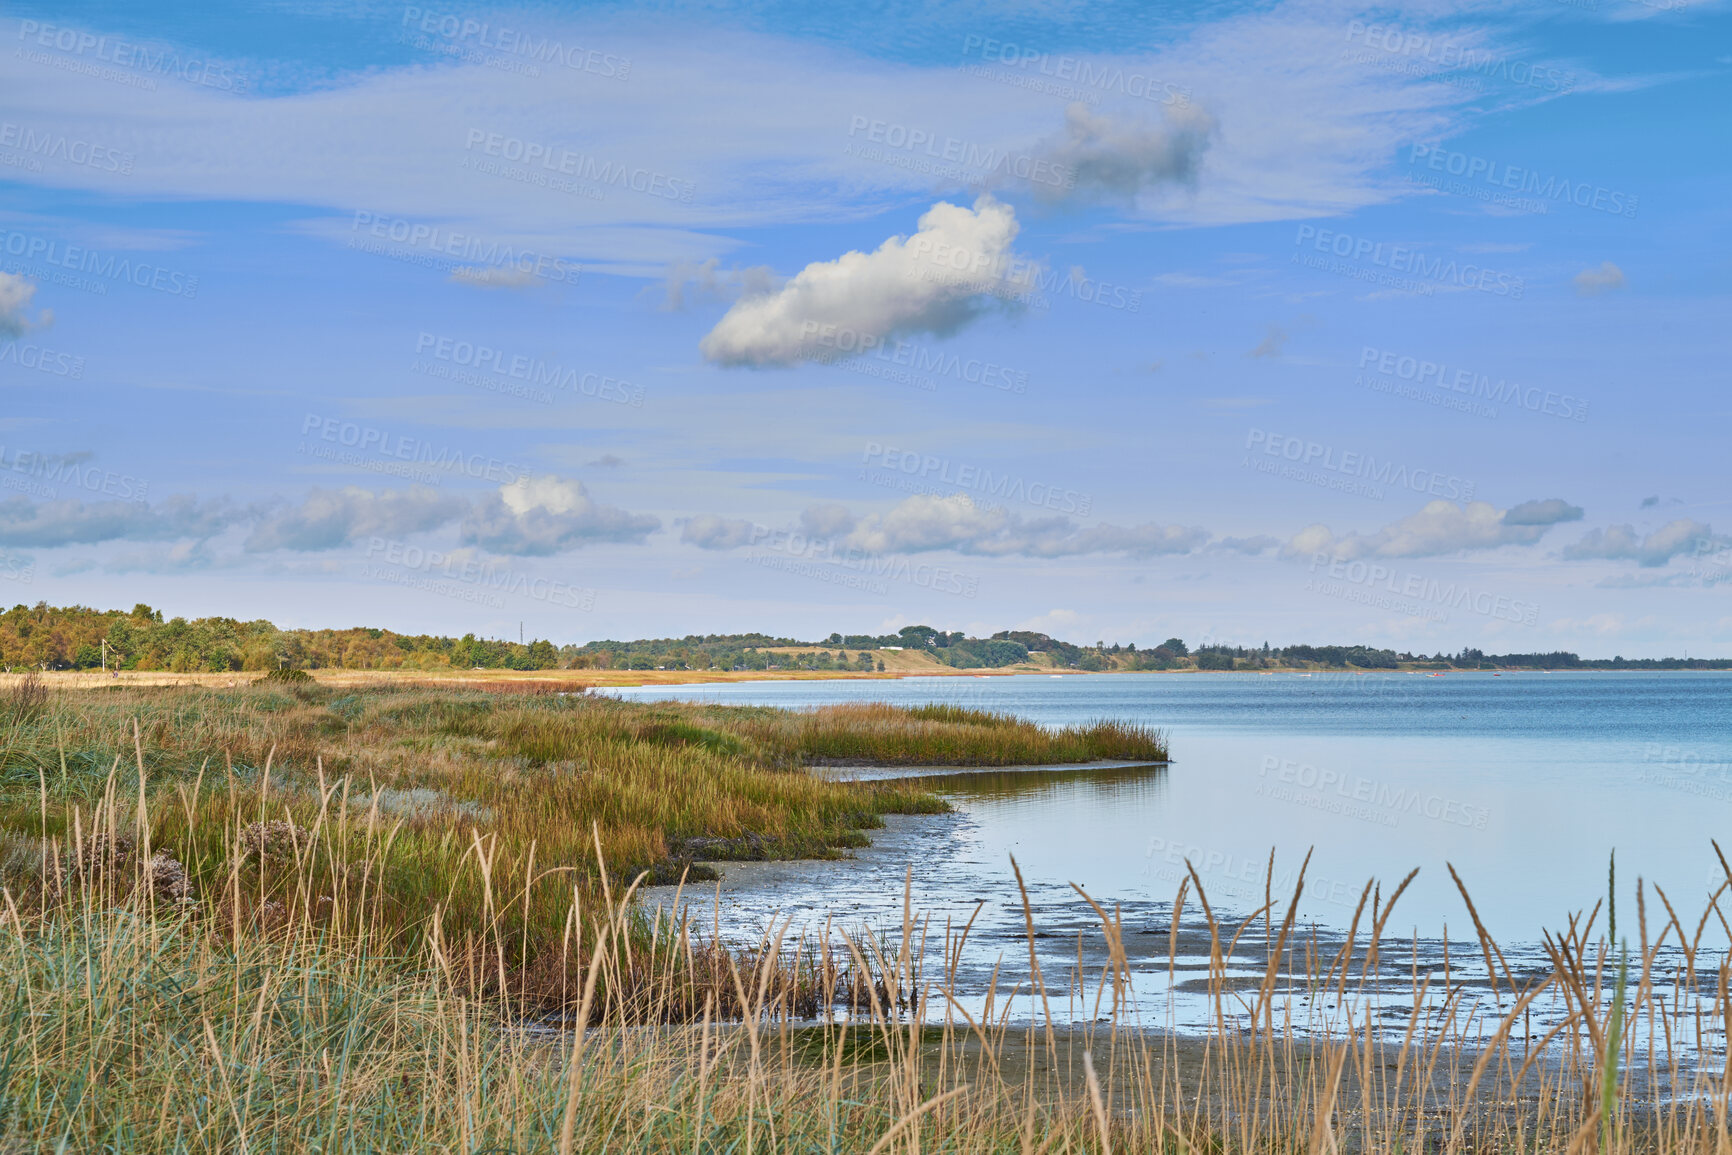 Buy stock photo Landscape of sea, lake or coast against sky background with clouds and copy space. Swamp with reeds and wild grass growing at an empty lake outside. Peaceful, calm and beautiful scenic view in nature